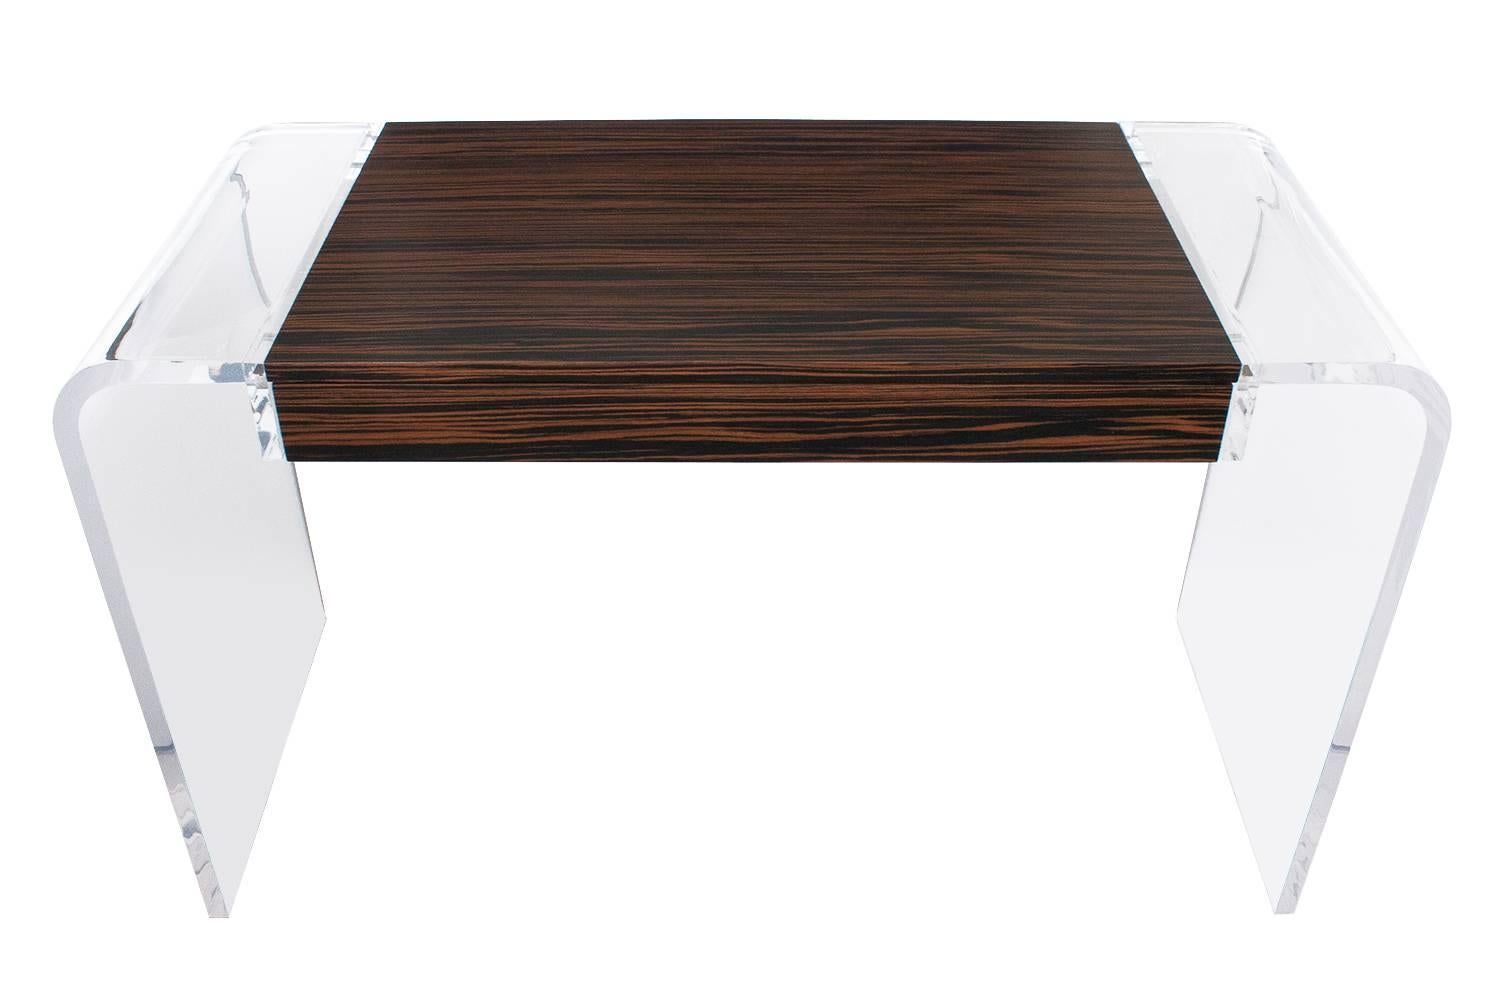 Stunning Macassar ebony and Lucite floating desk. The piece has a wide variety of uses such as a desk, vanity, writing table or console table. A Macassar case and drawer are suspended between two one inch thick bent Lucite legs. The case measures